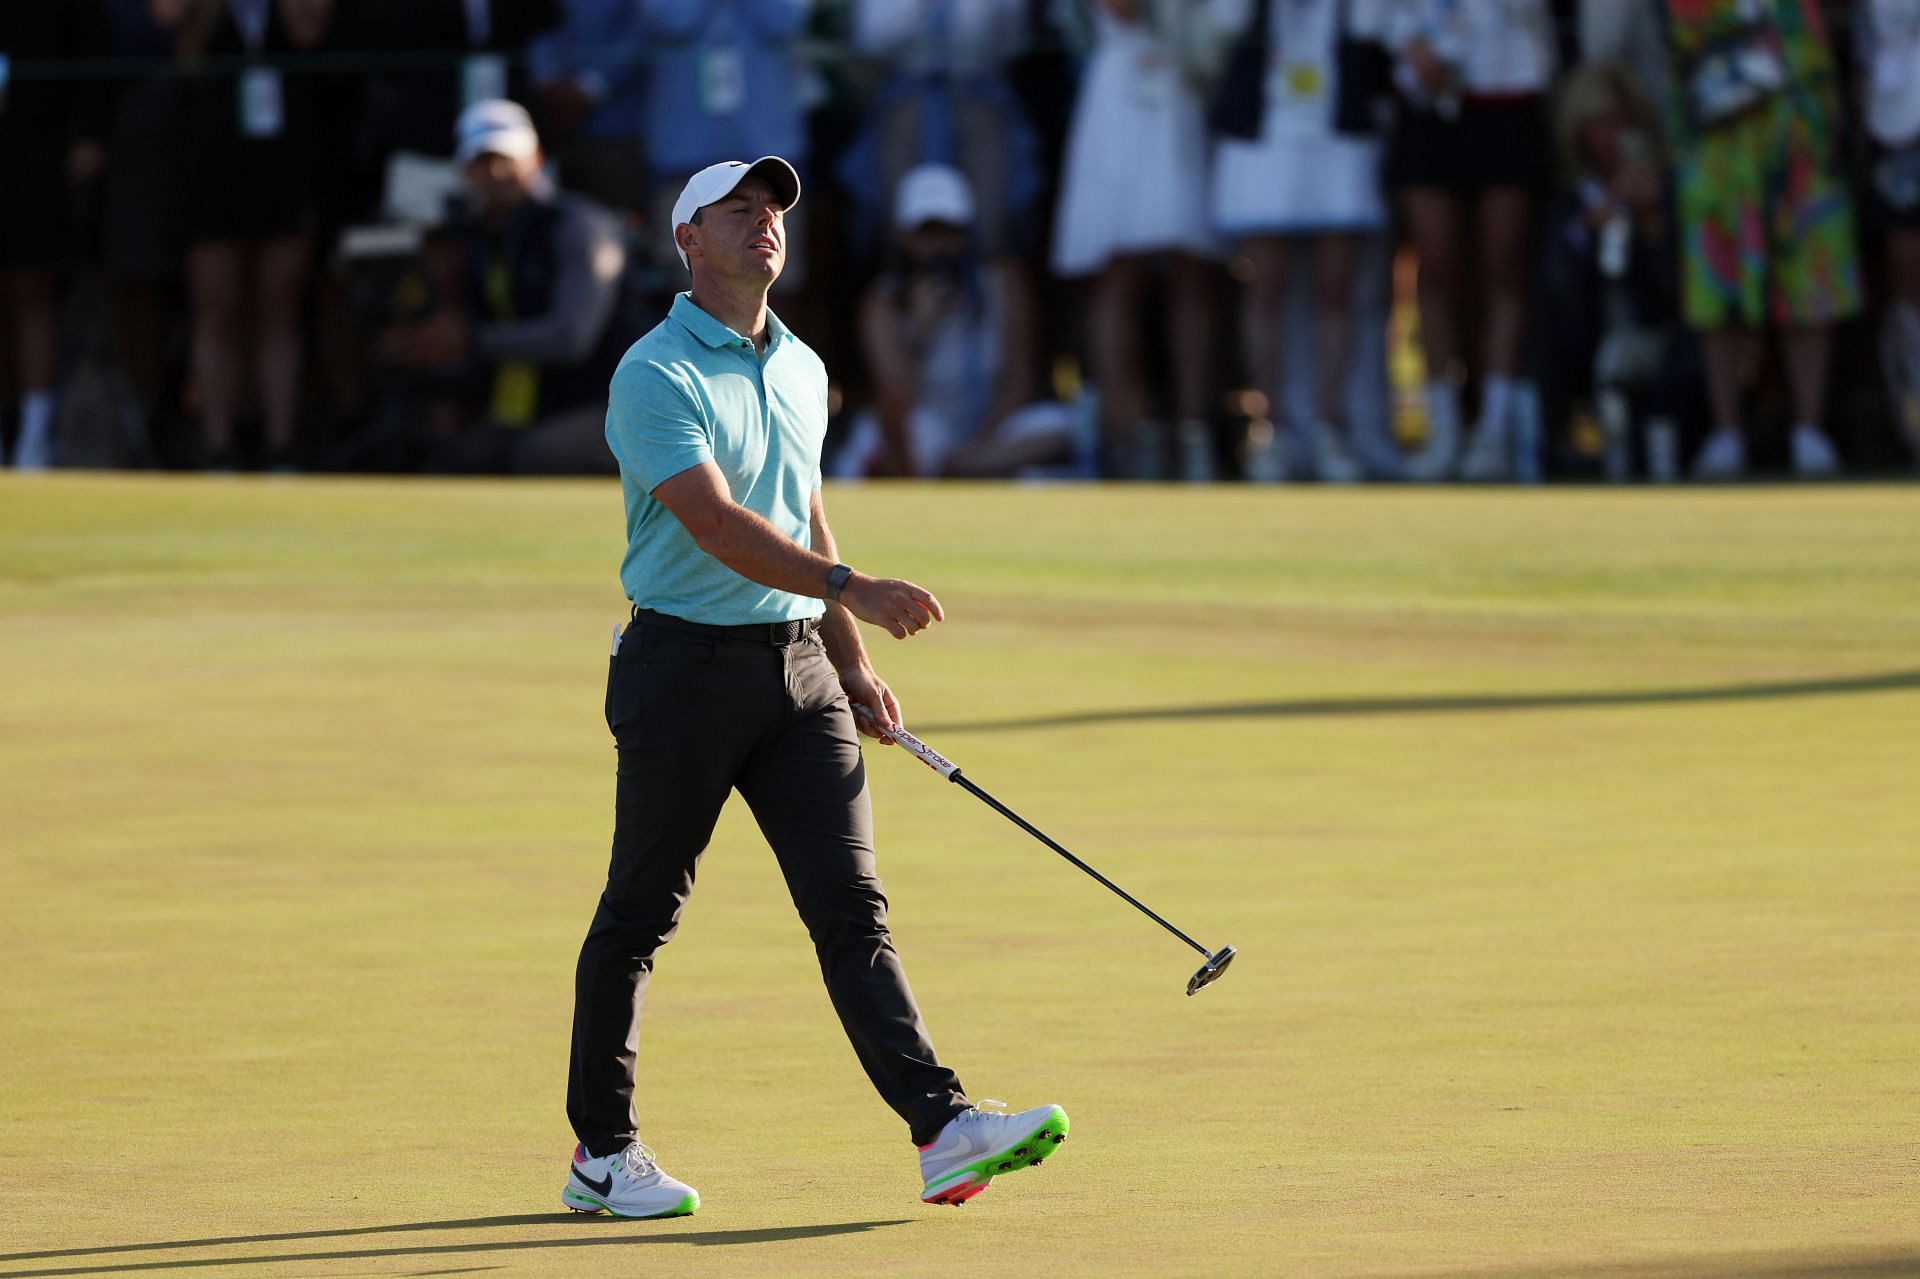 Rory McIlroy reacts to his missed putt on the 18th hole of the 123rd US Open Championship - Final Round